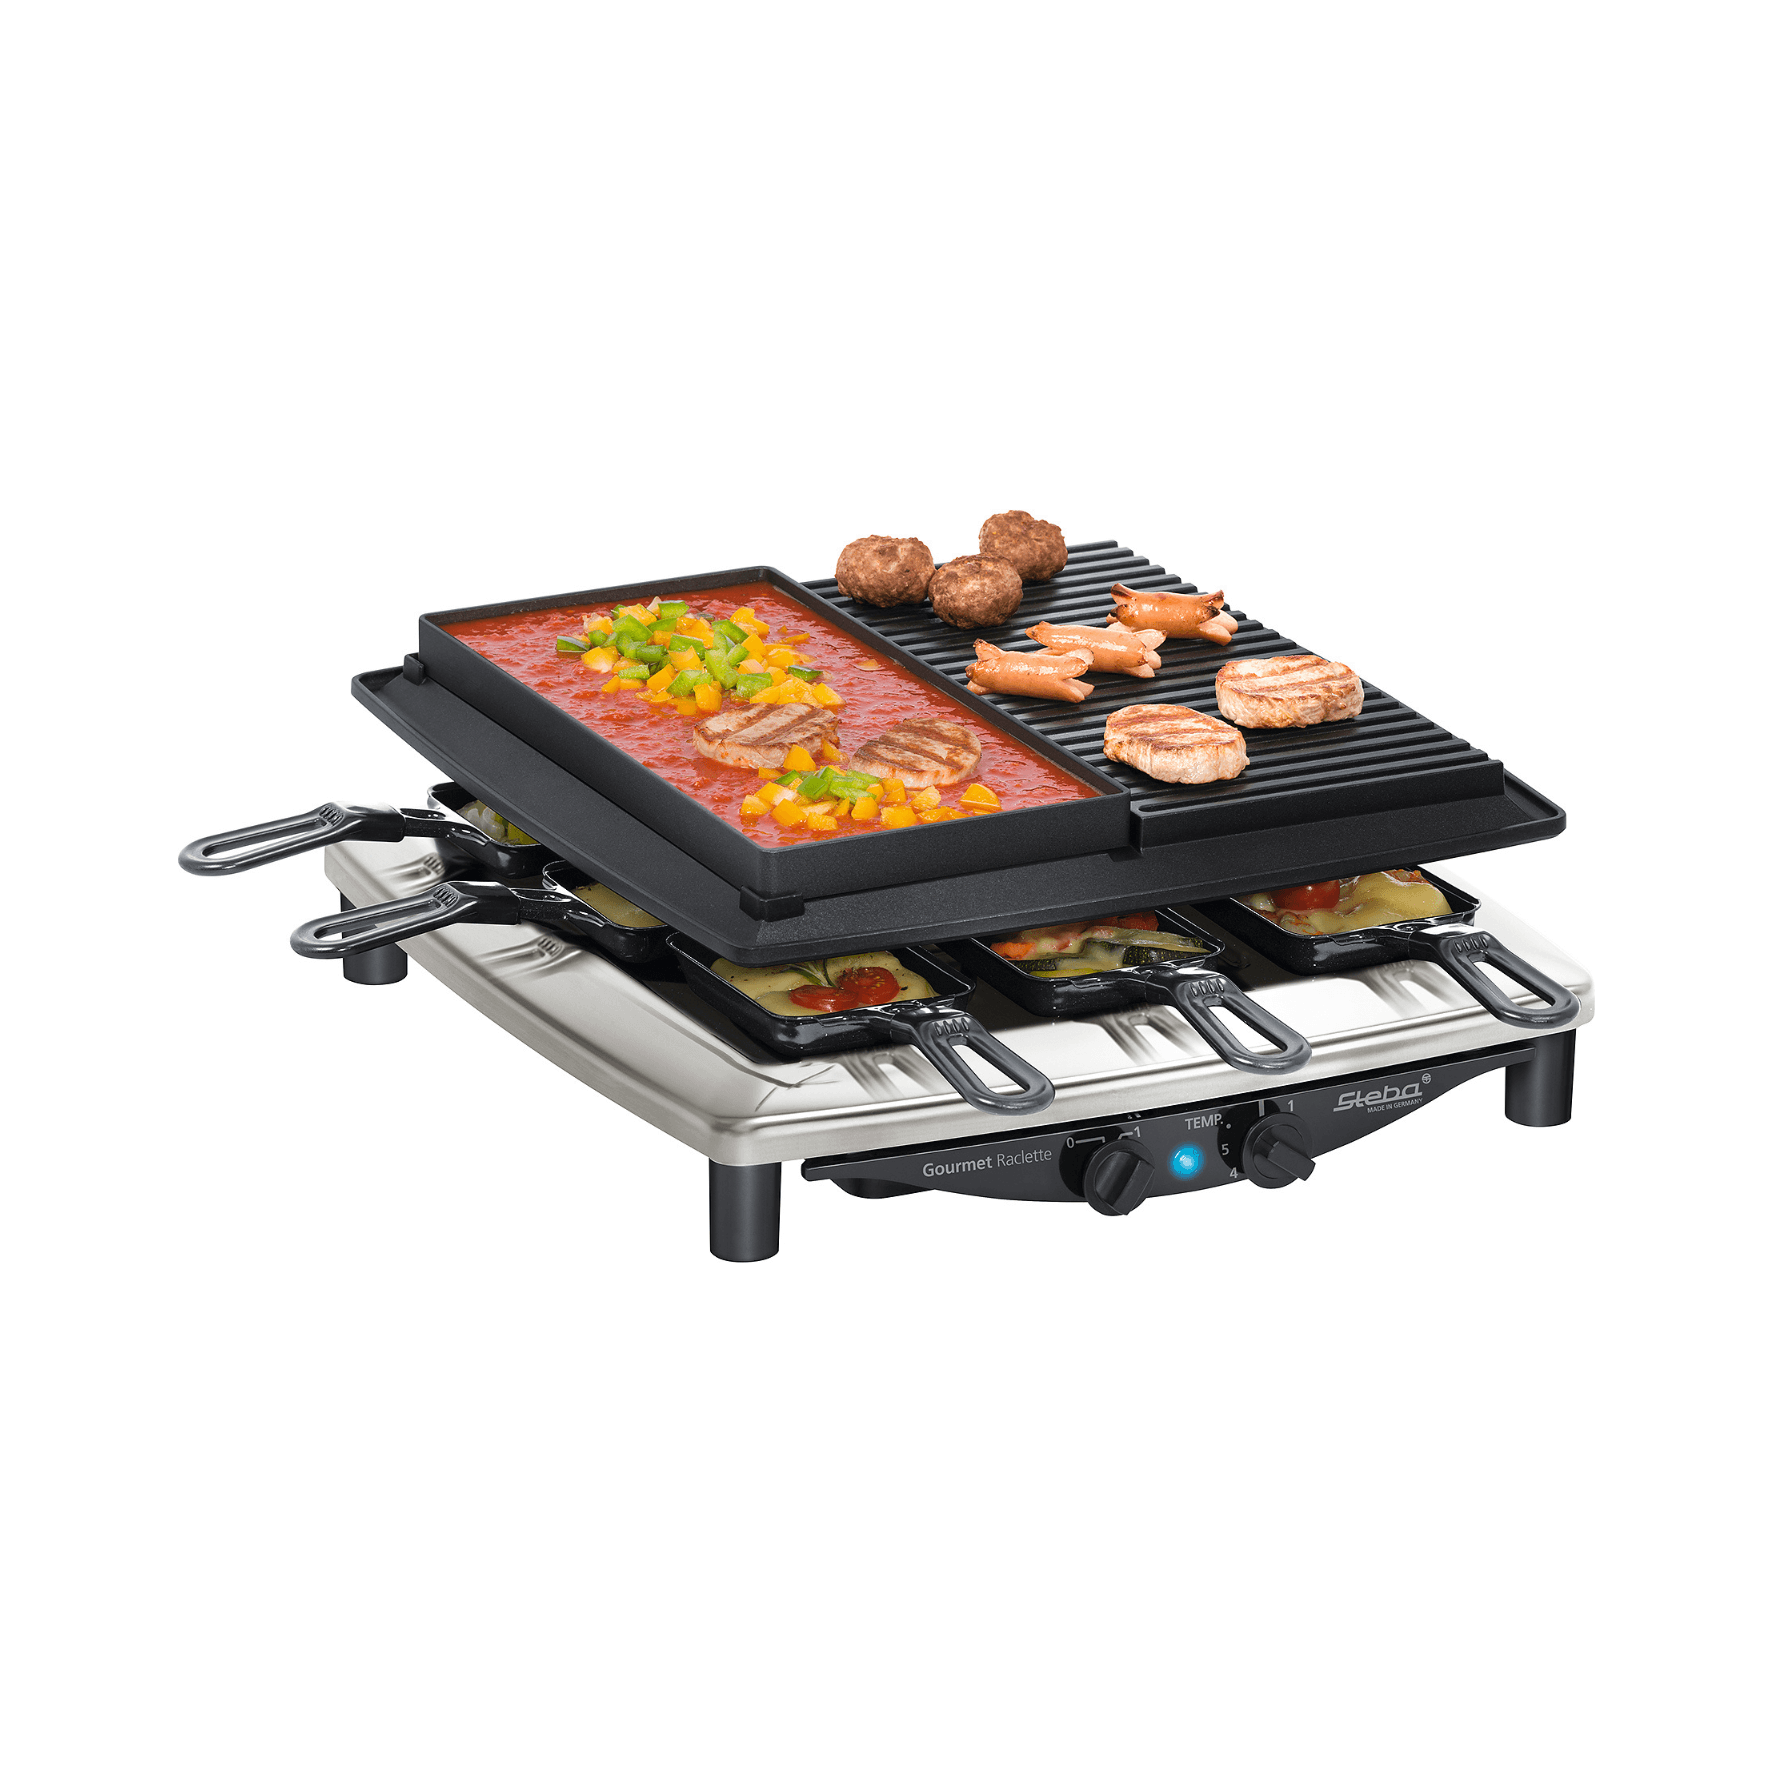 Steba Rc-4-plus-delux Quality Raclette For 6 People – Black W/ Non-stick Coated Grill Plate, Scratch-resistant Stone Plate, Griddle, And Plancha | C